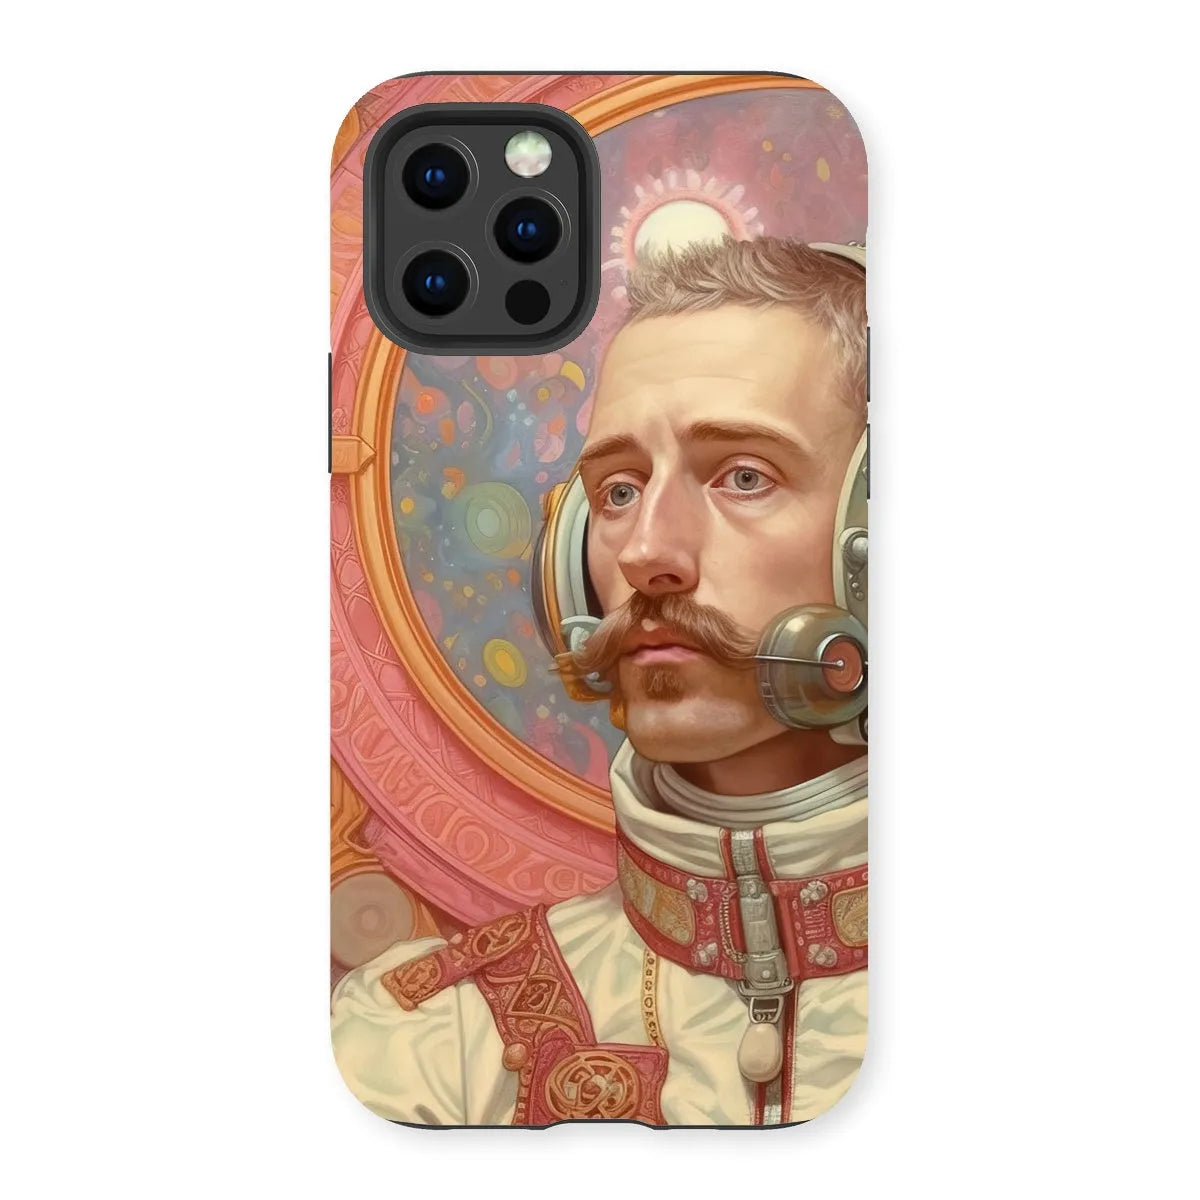 Axel The Gay Astronaut - Gay Aesthetic Art Phone Case - Iphone 13 Pro / Matte - Mobile Phone Cases - Aesthetic Art